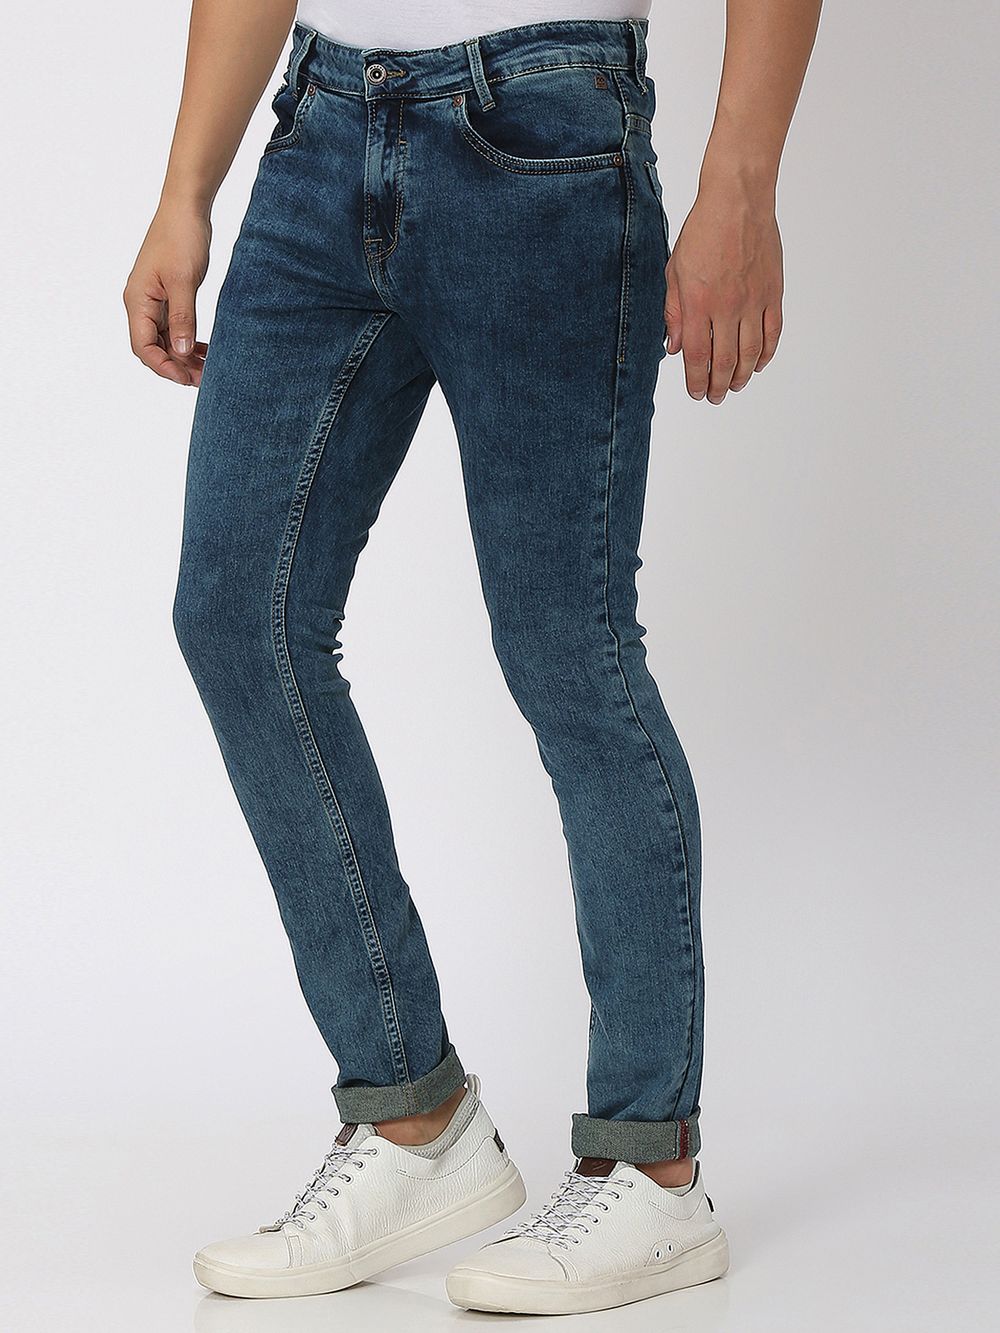 Tinted Skinny Fit Originals Stretch Jeans